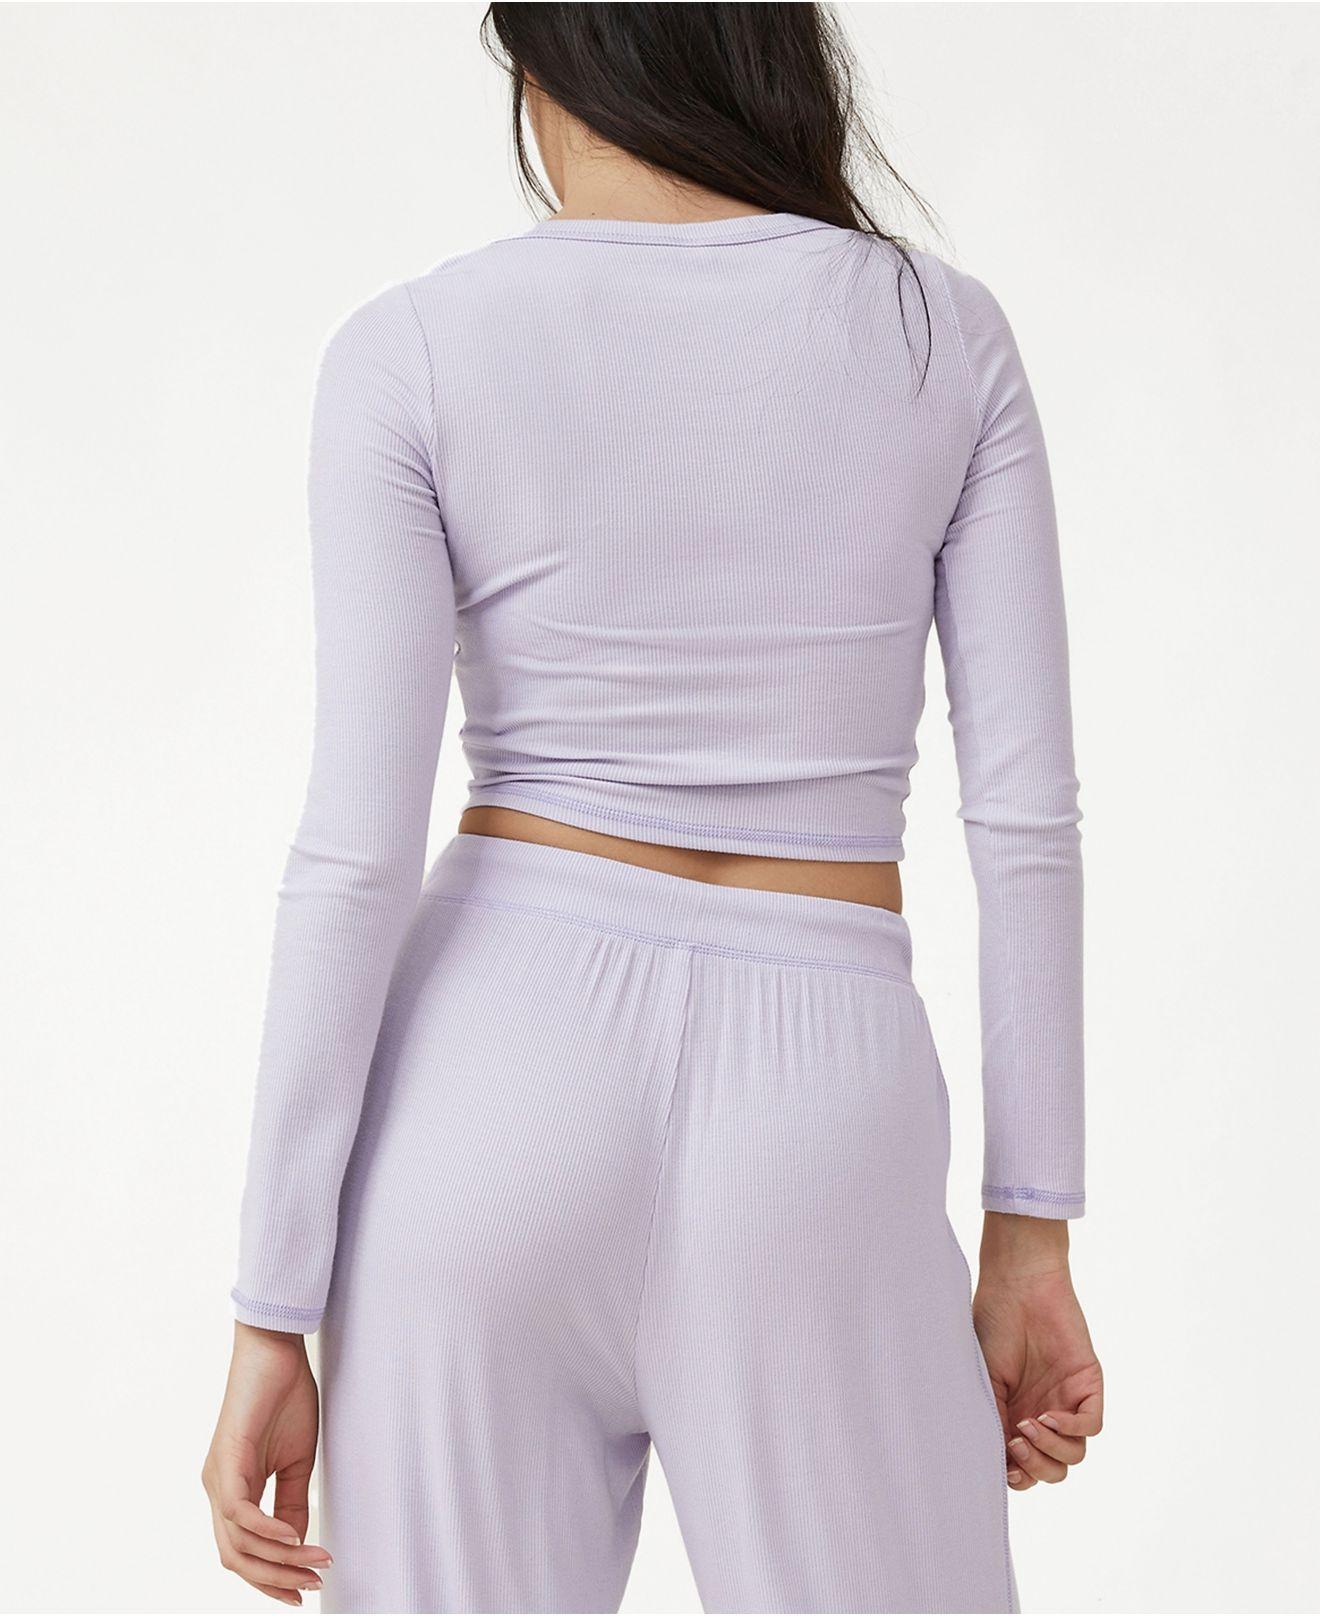 Cotton On Sleep Recovery Cropped Long Sleeve Top in Purple | Lyst